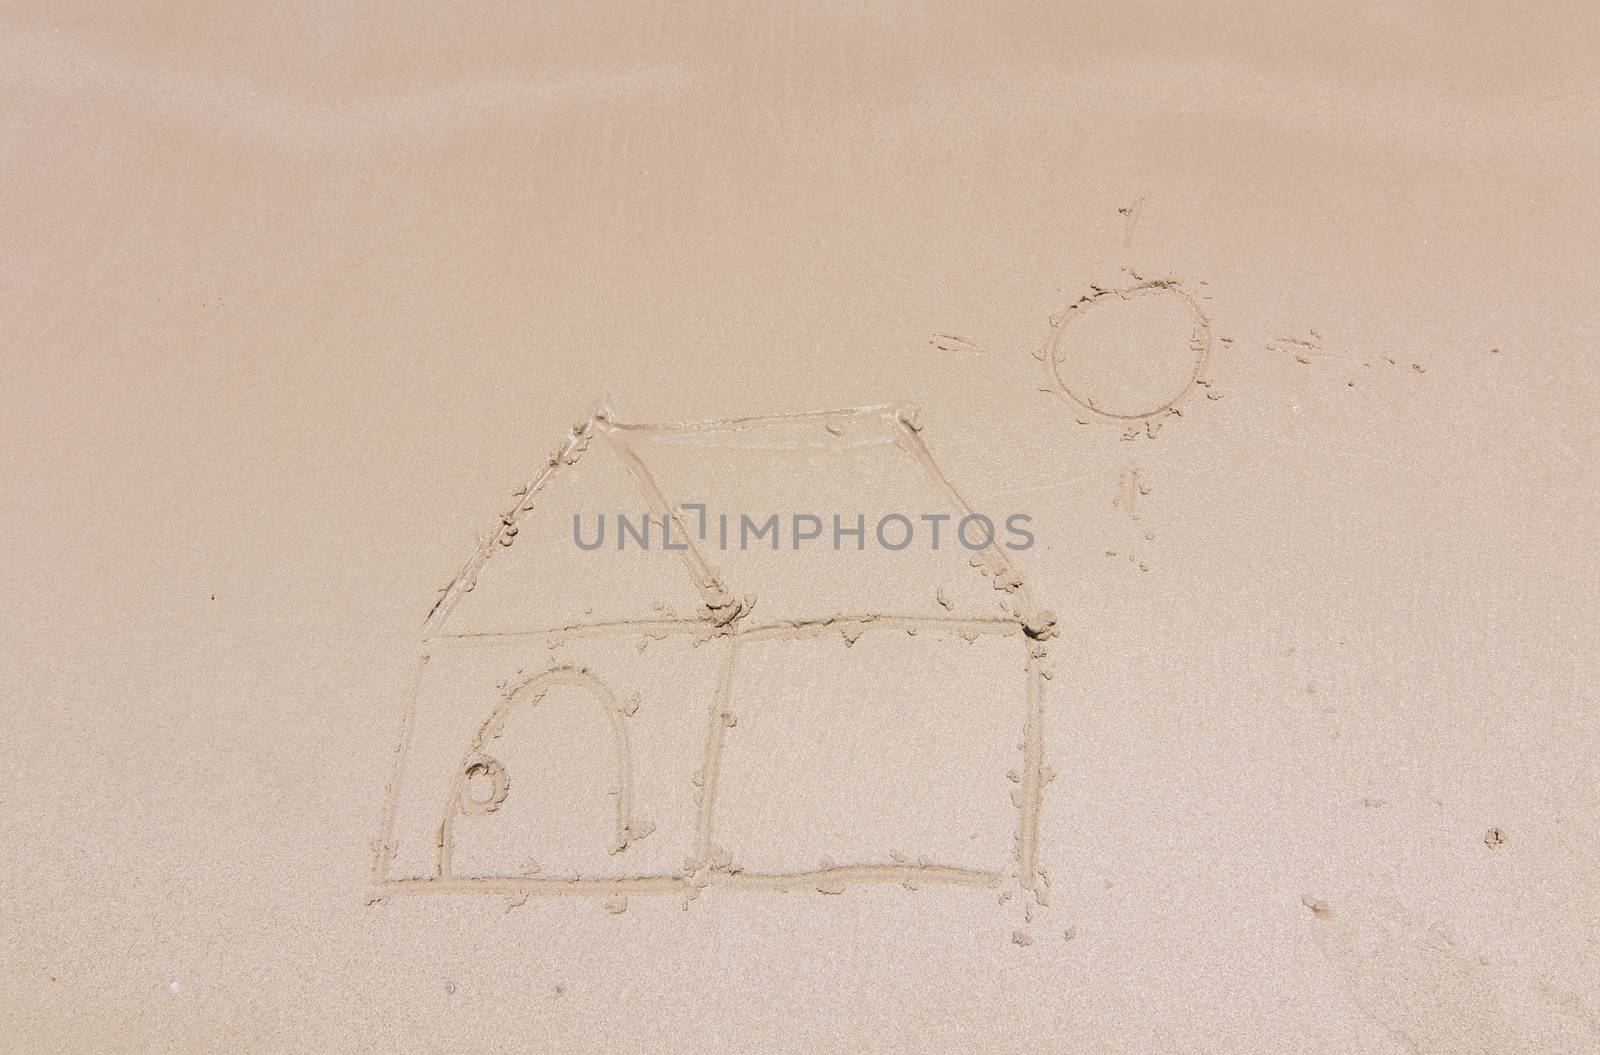 Painting a house on sand by Sorapop